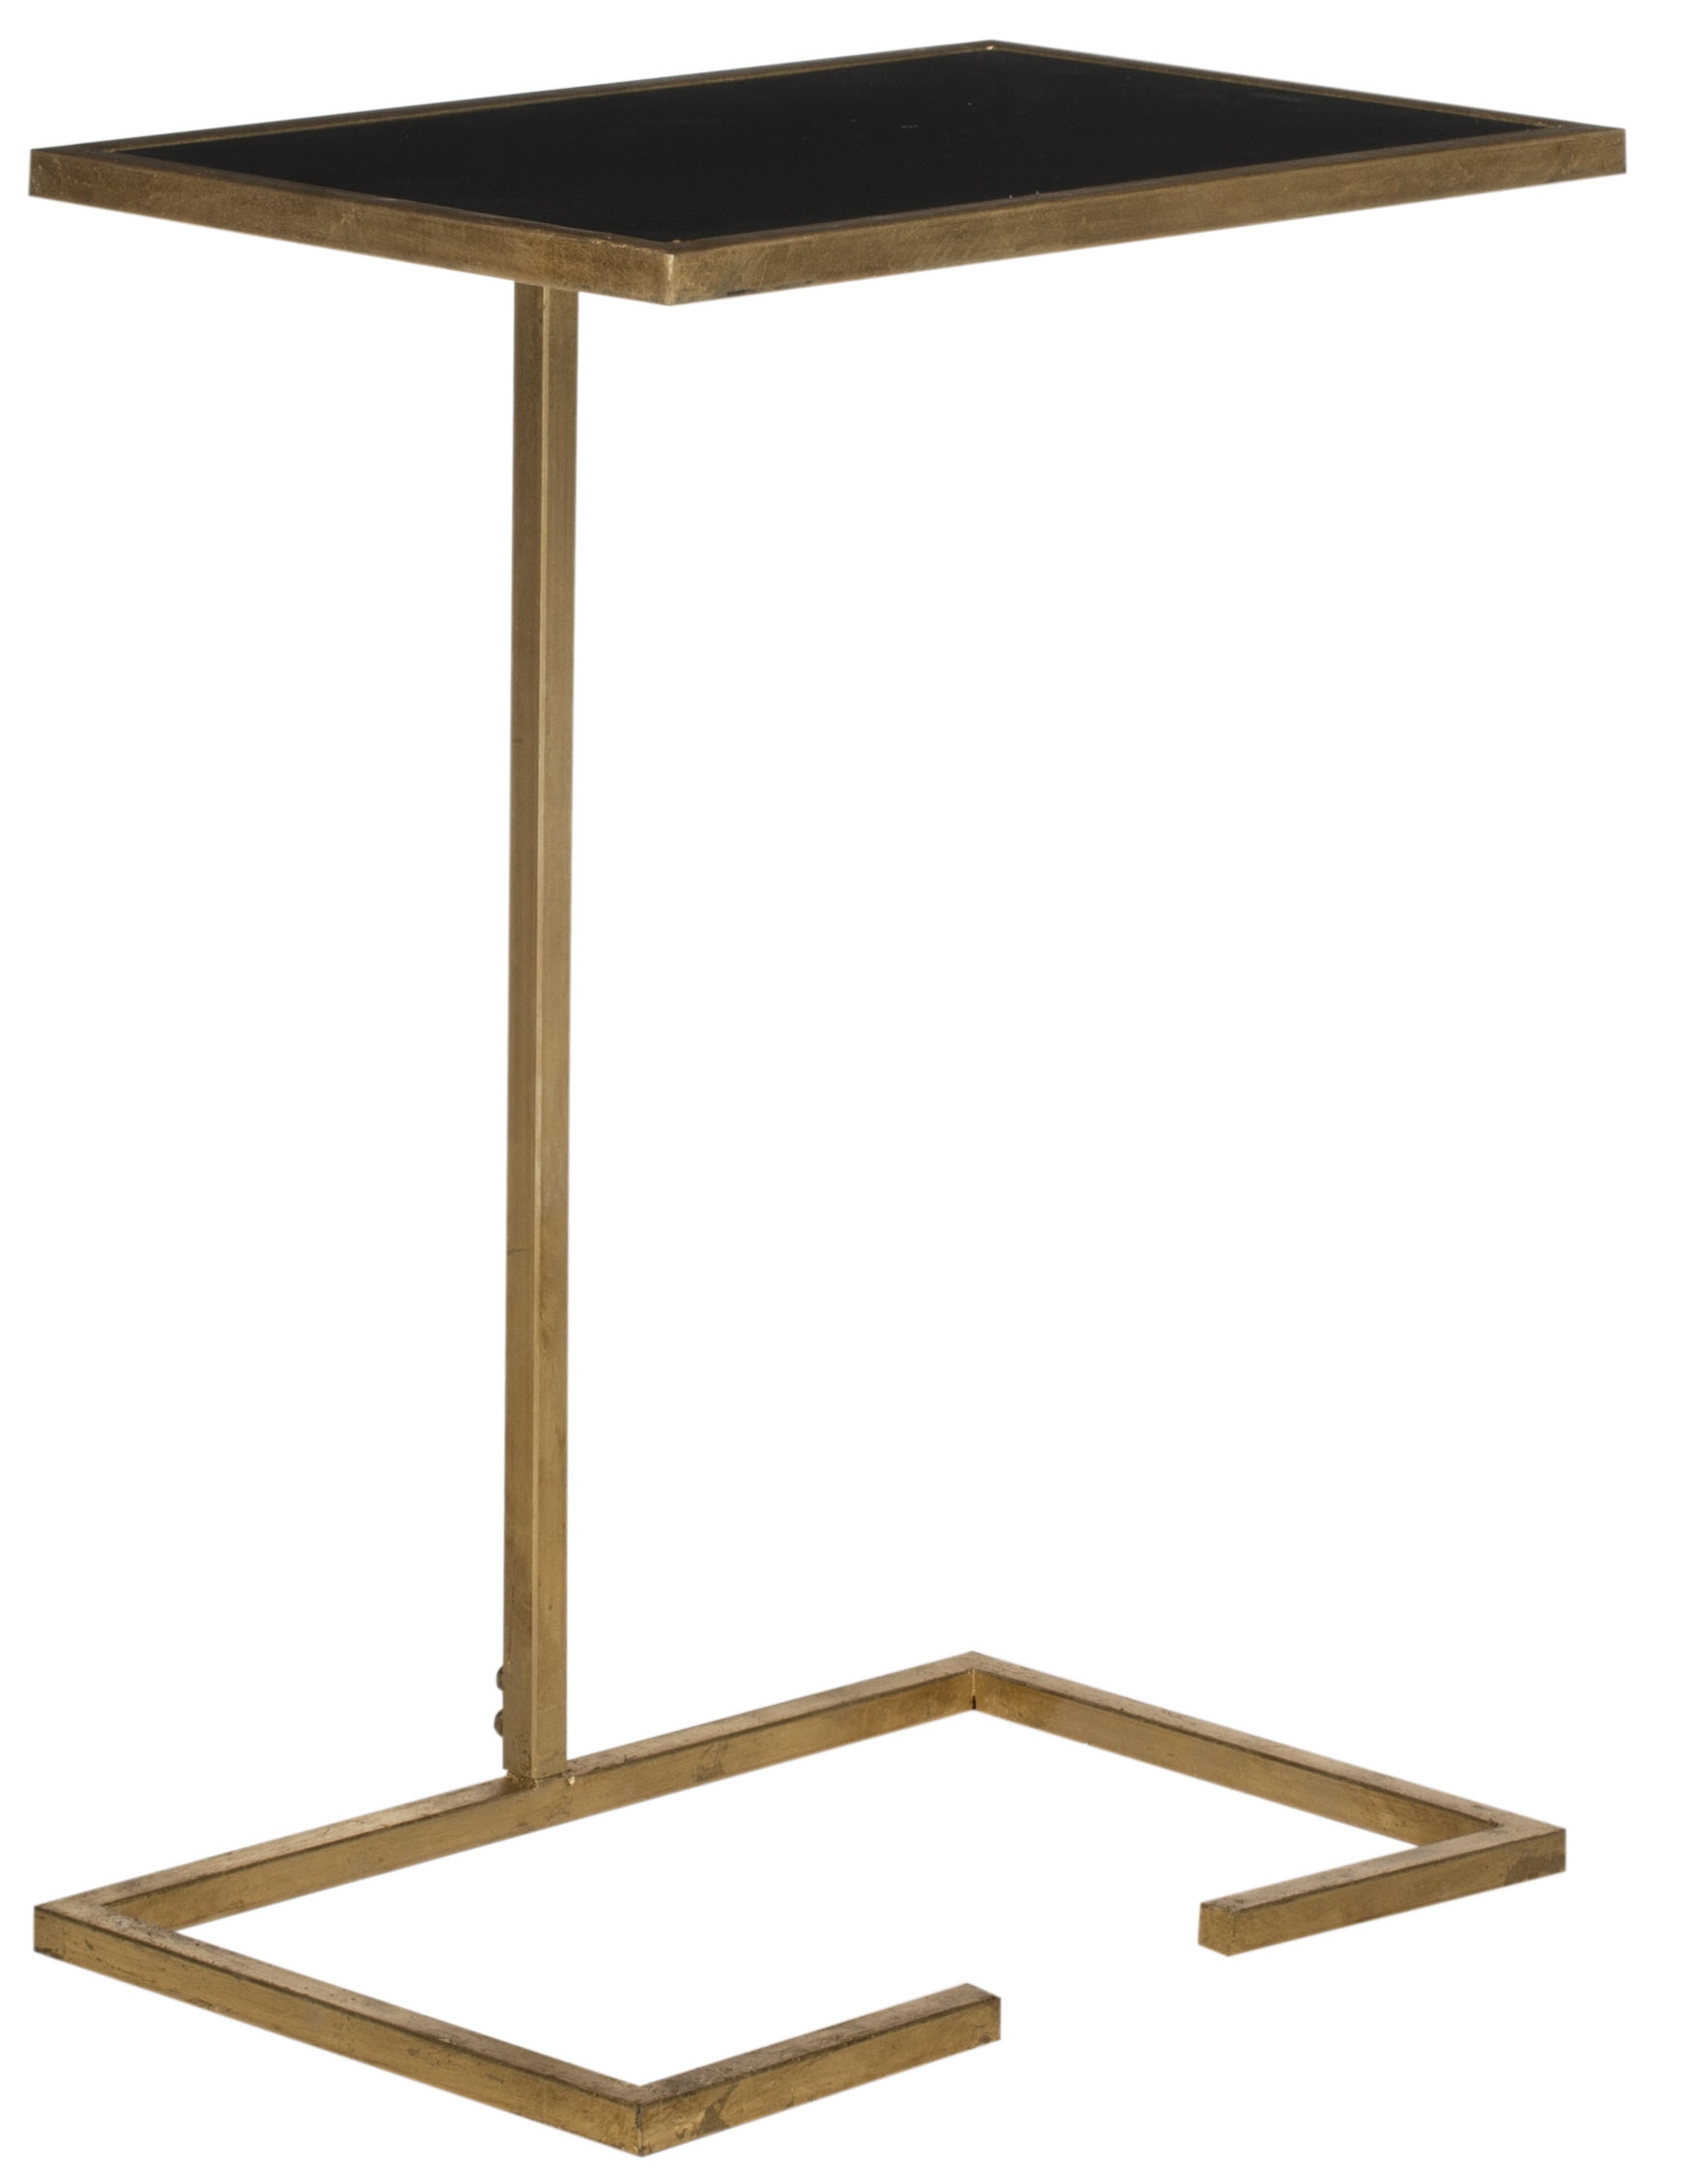 Neil Accent Table - Gold/Black - Arlo Home - Image 1